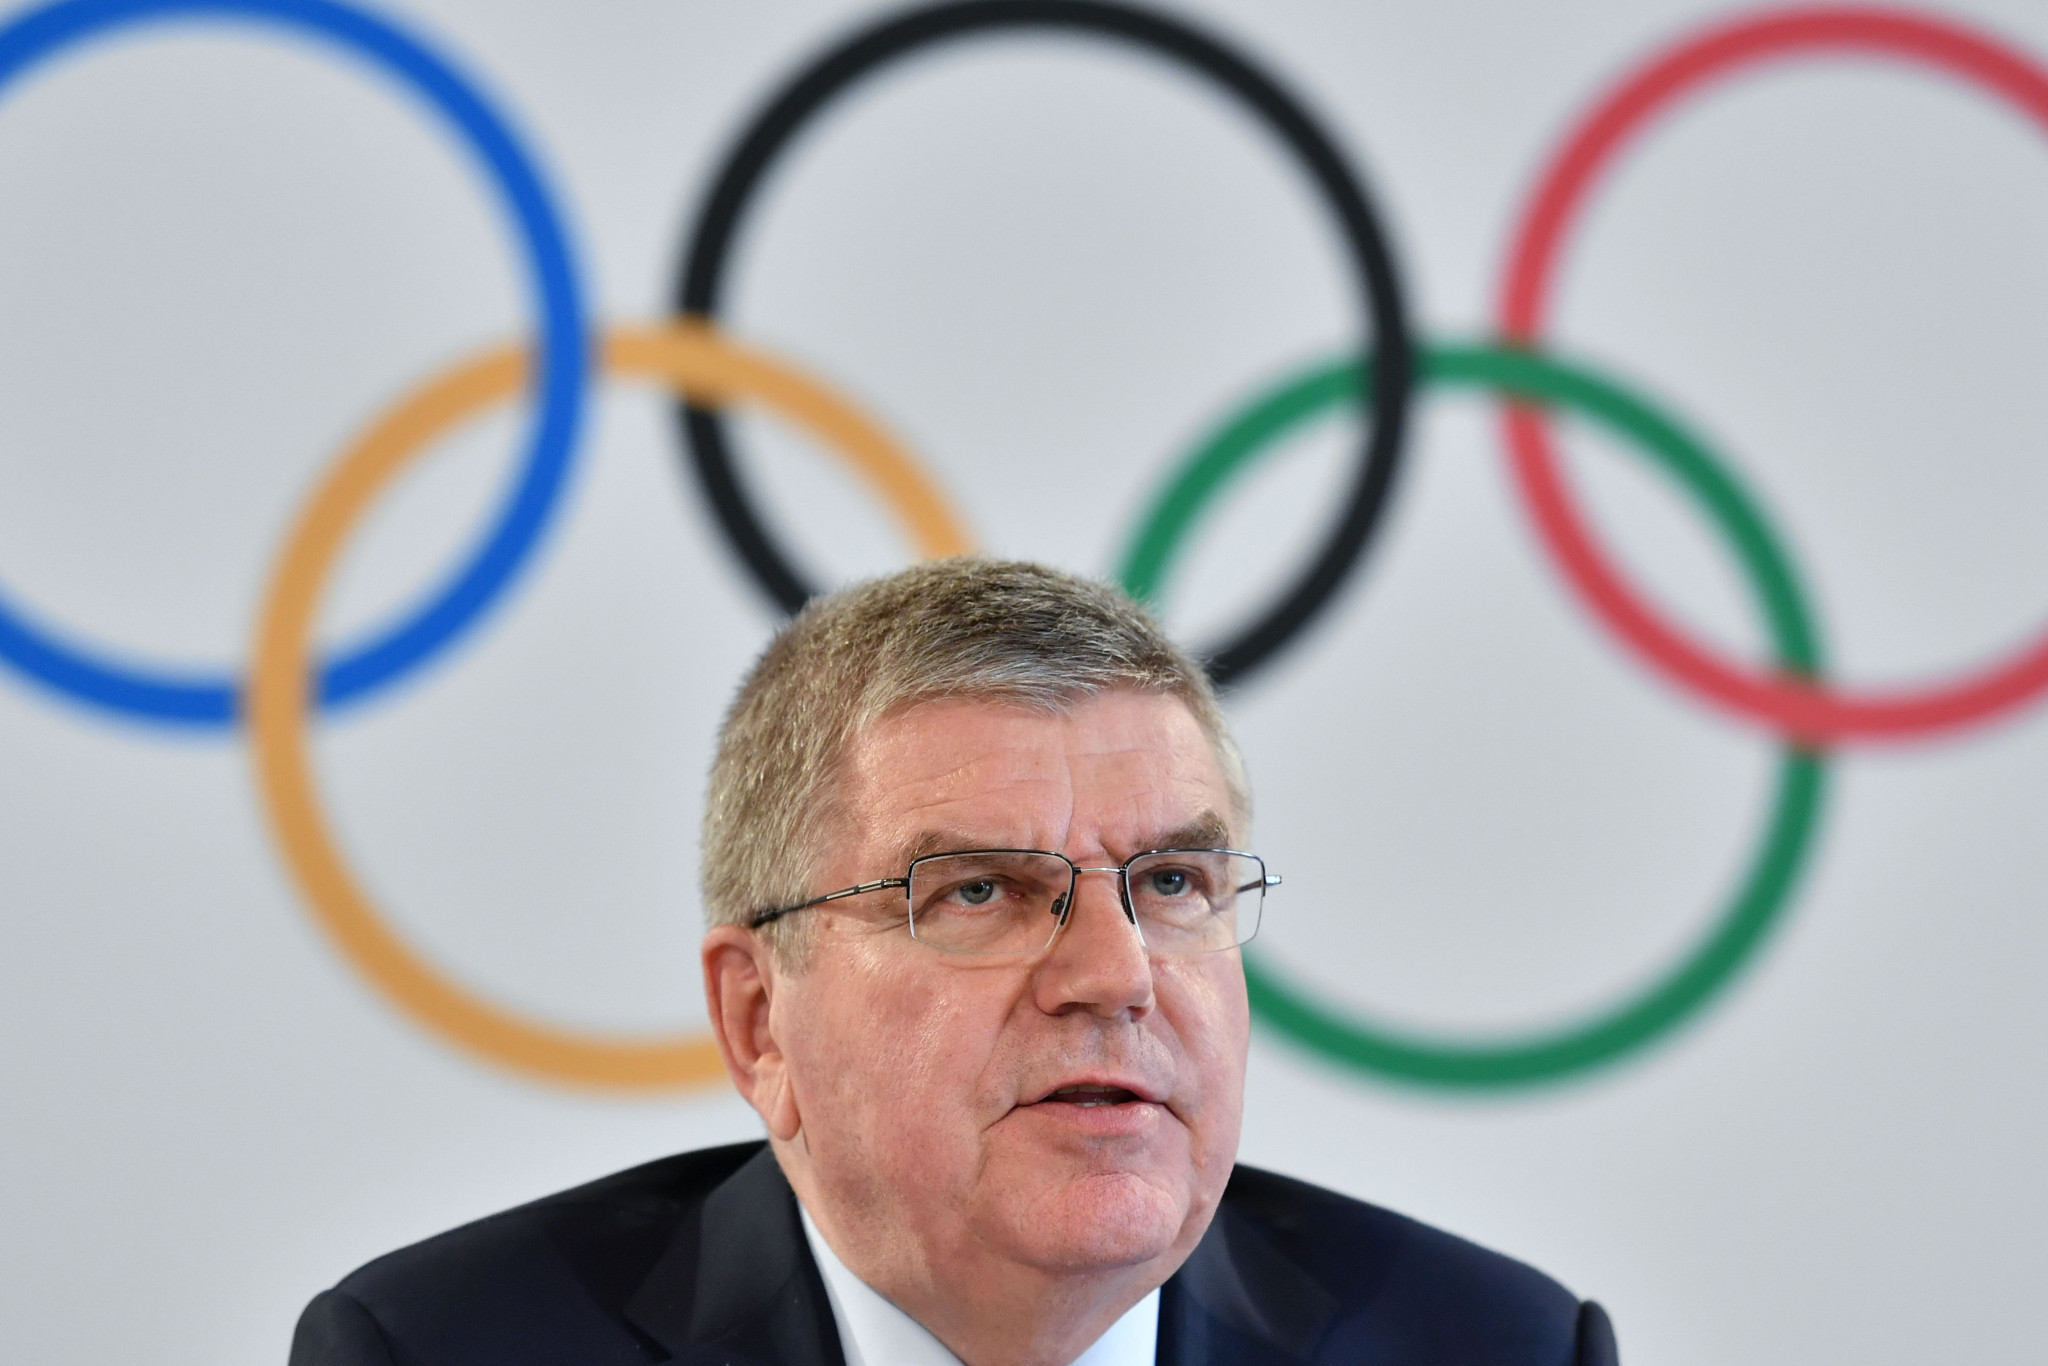 Thomas Bach conceded the IOC were considering a complete cancellation of the Games owing to security fears in the region ©Getty Images